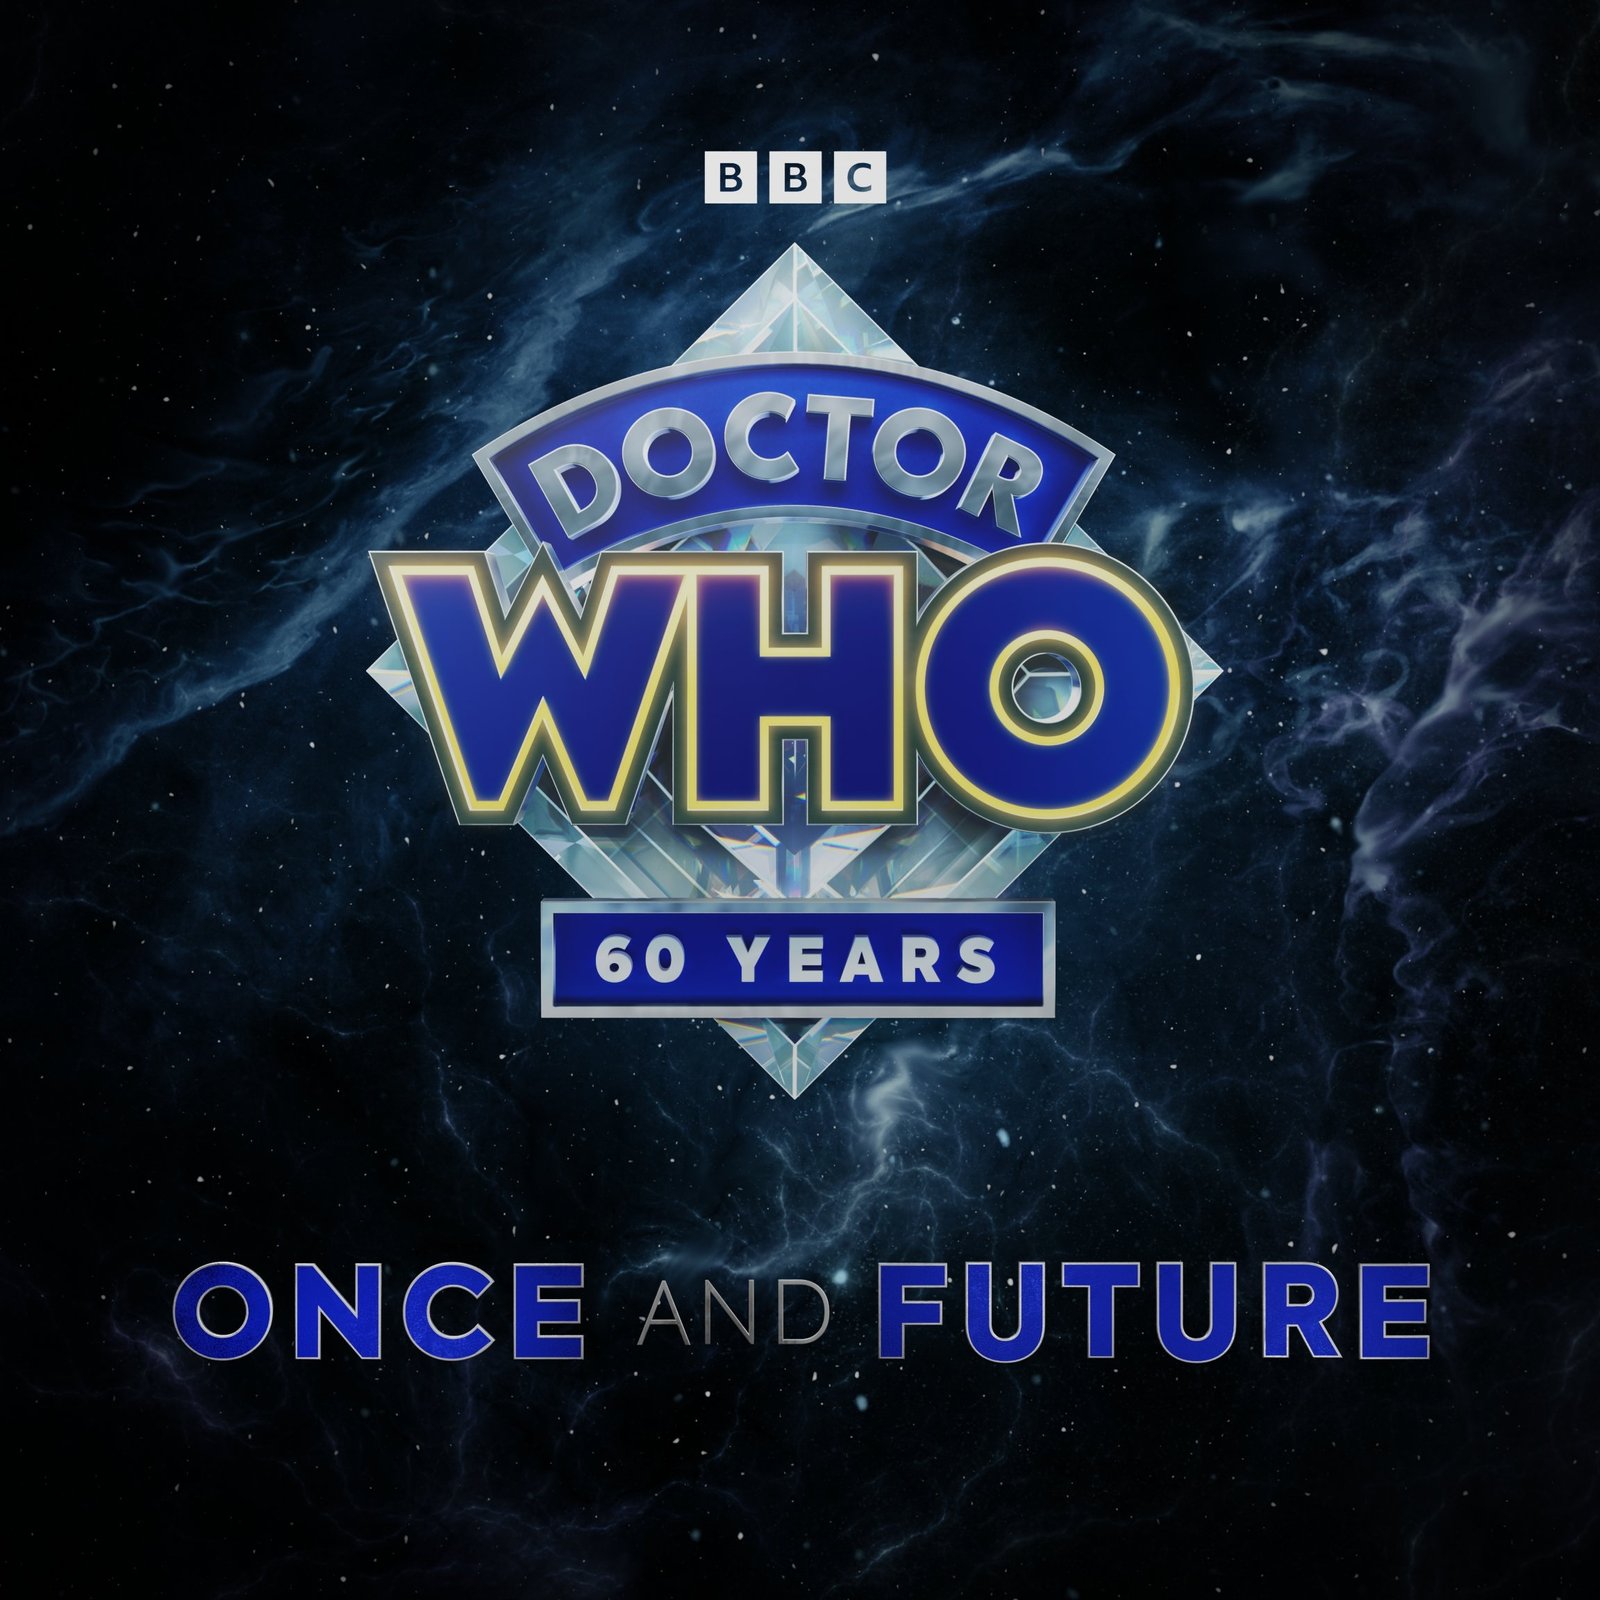 Big Finish to Celebrate Doctor Who’s 60th Anniversary with Multi-Doctor Audio Series